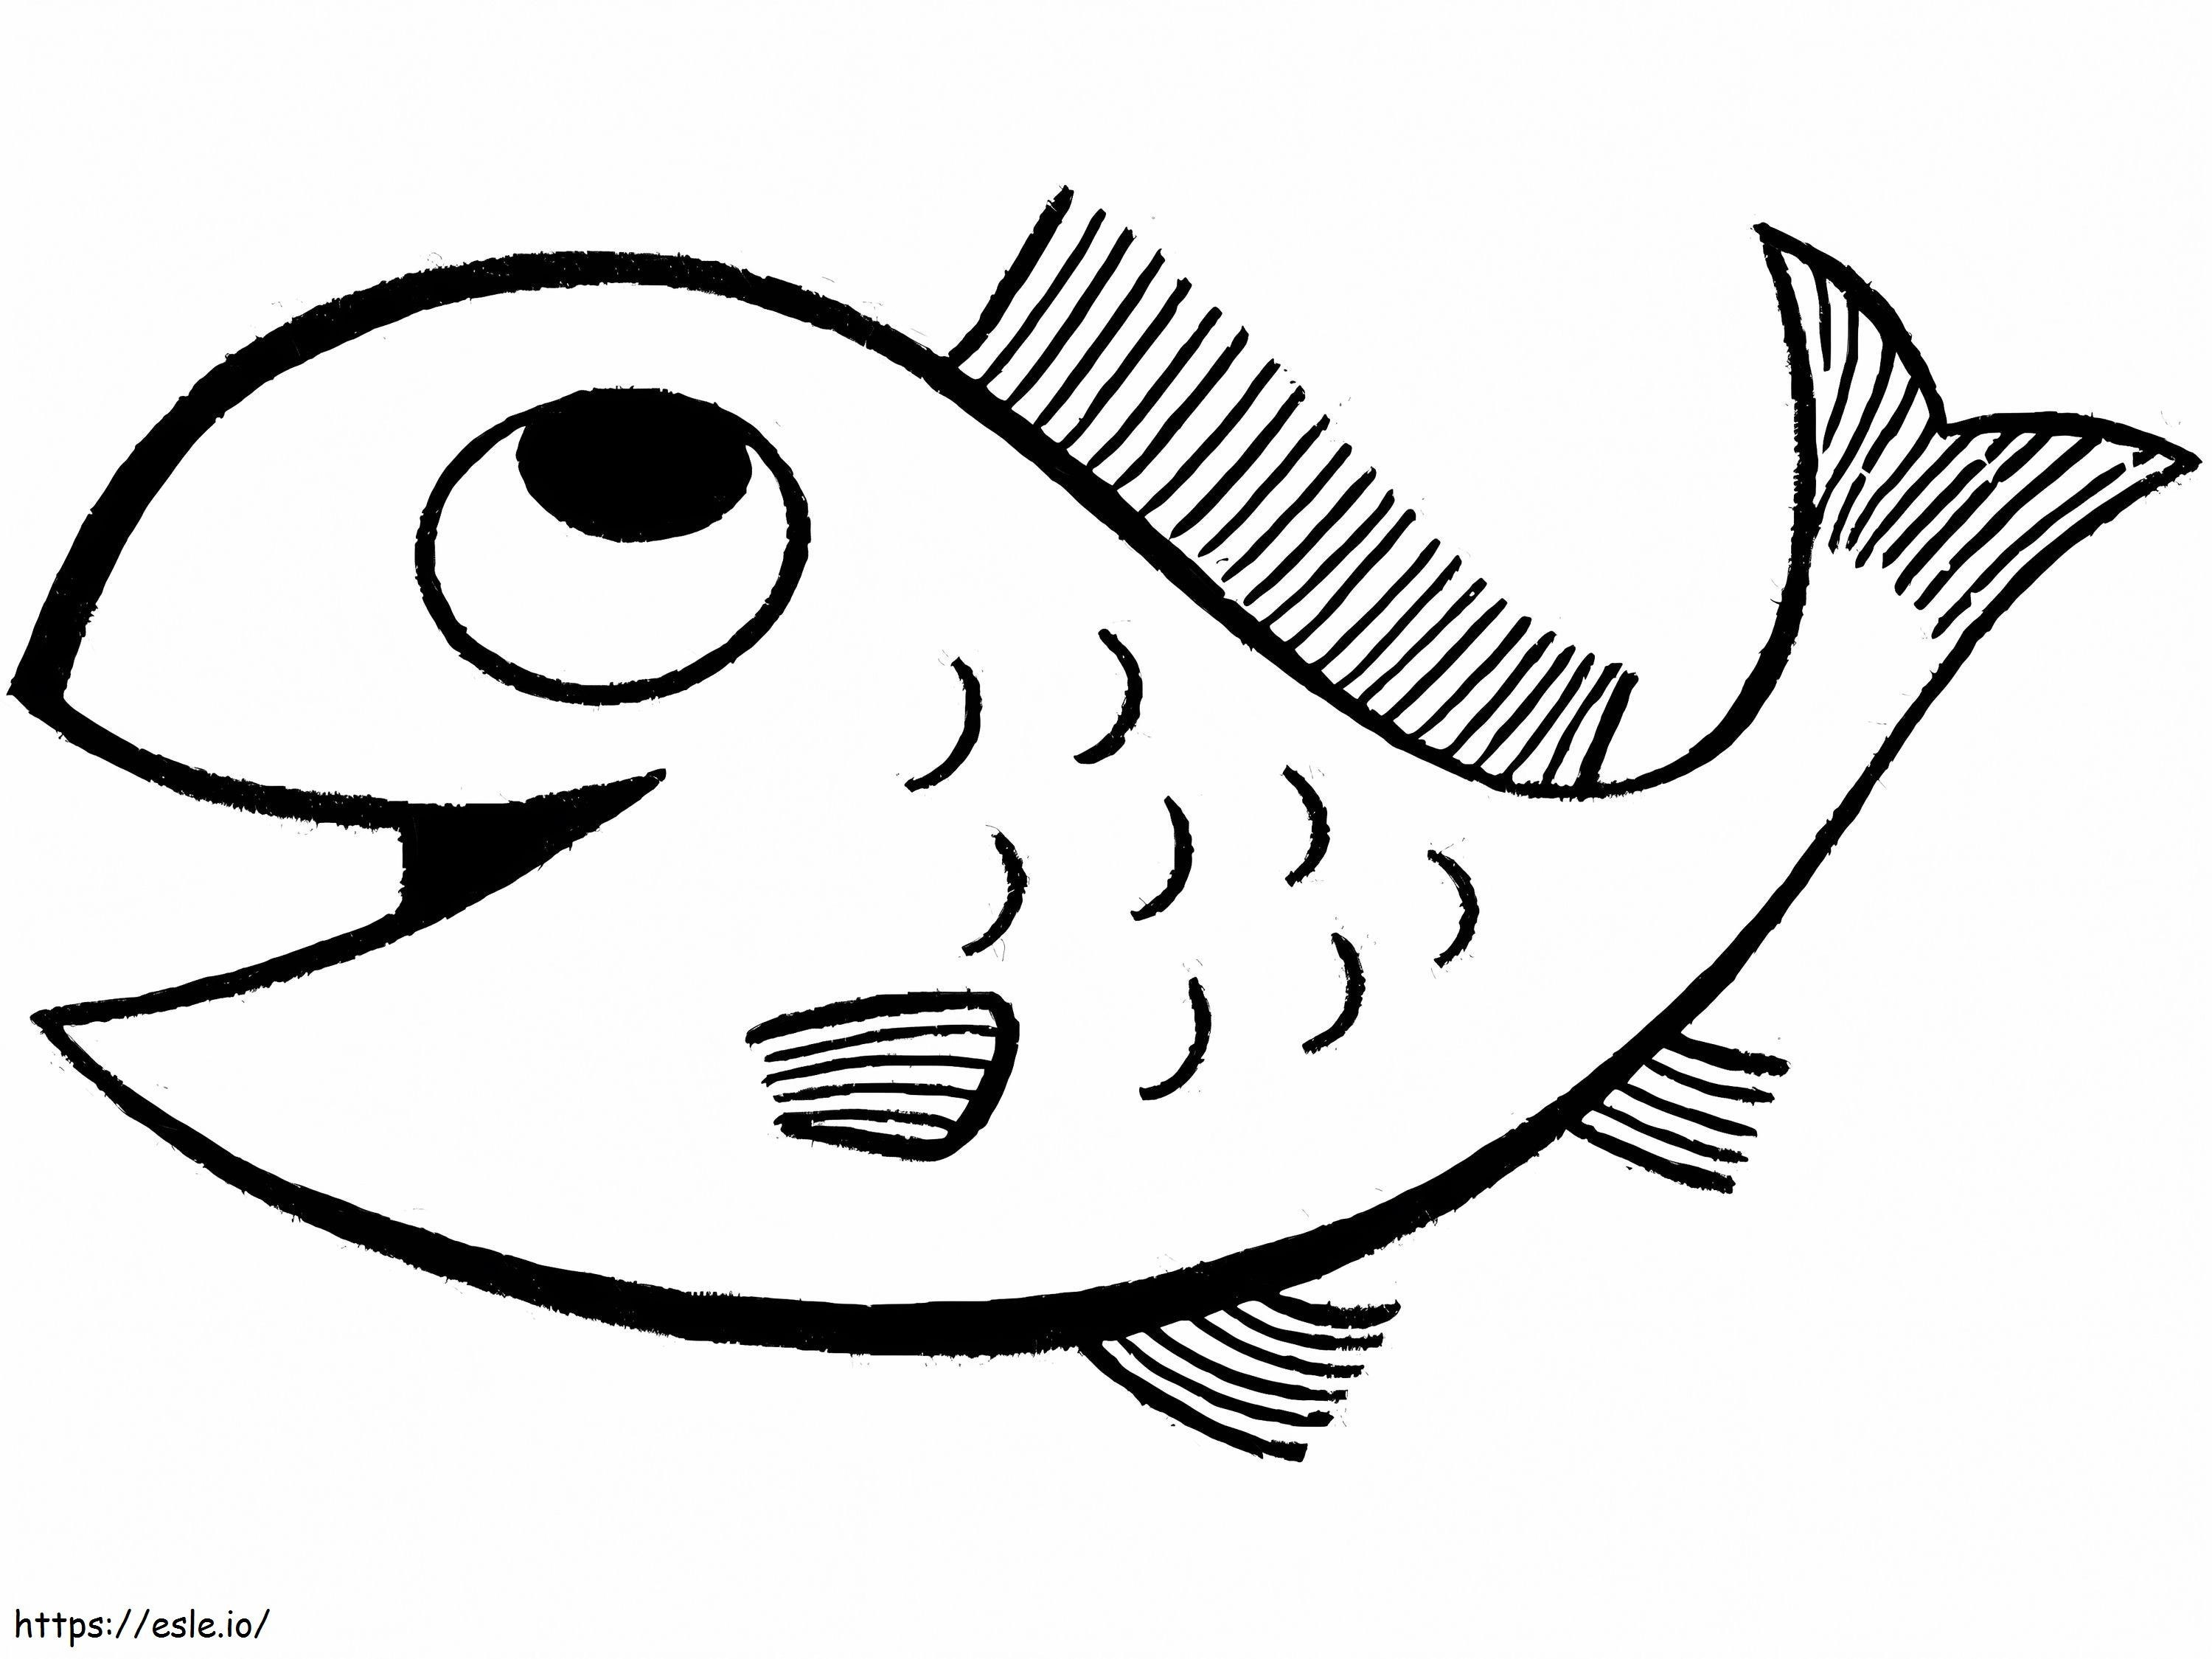 A Smiling Fish coloring page